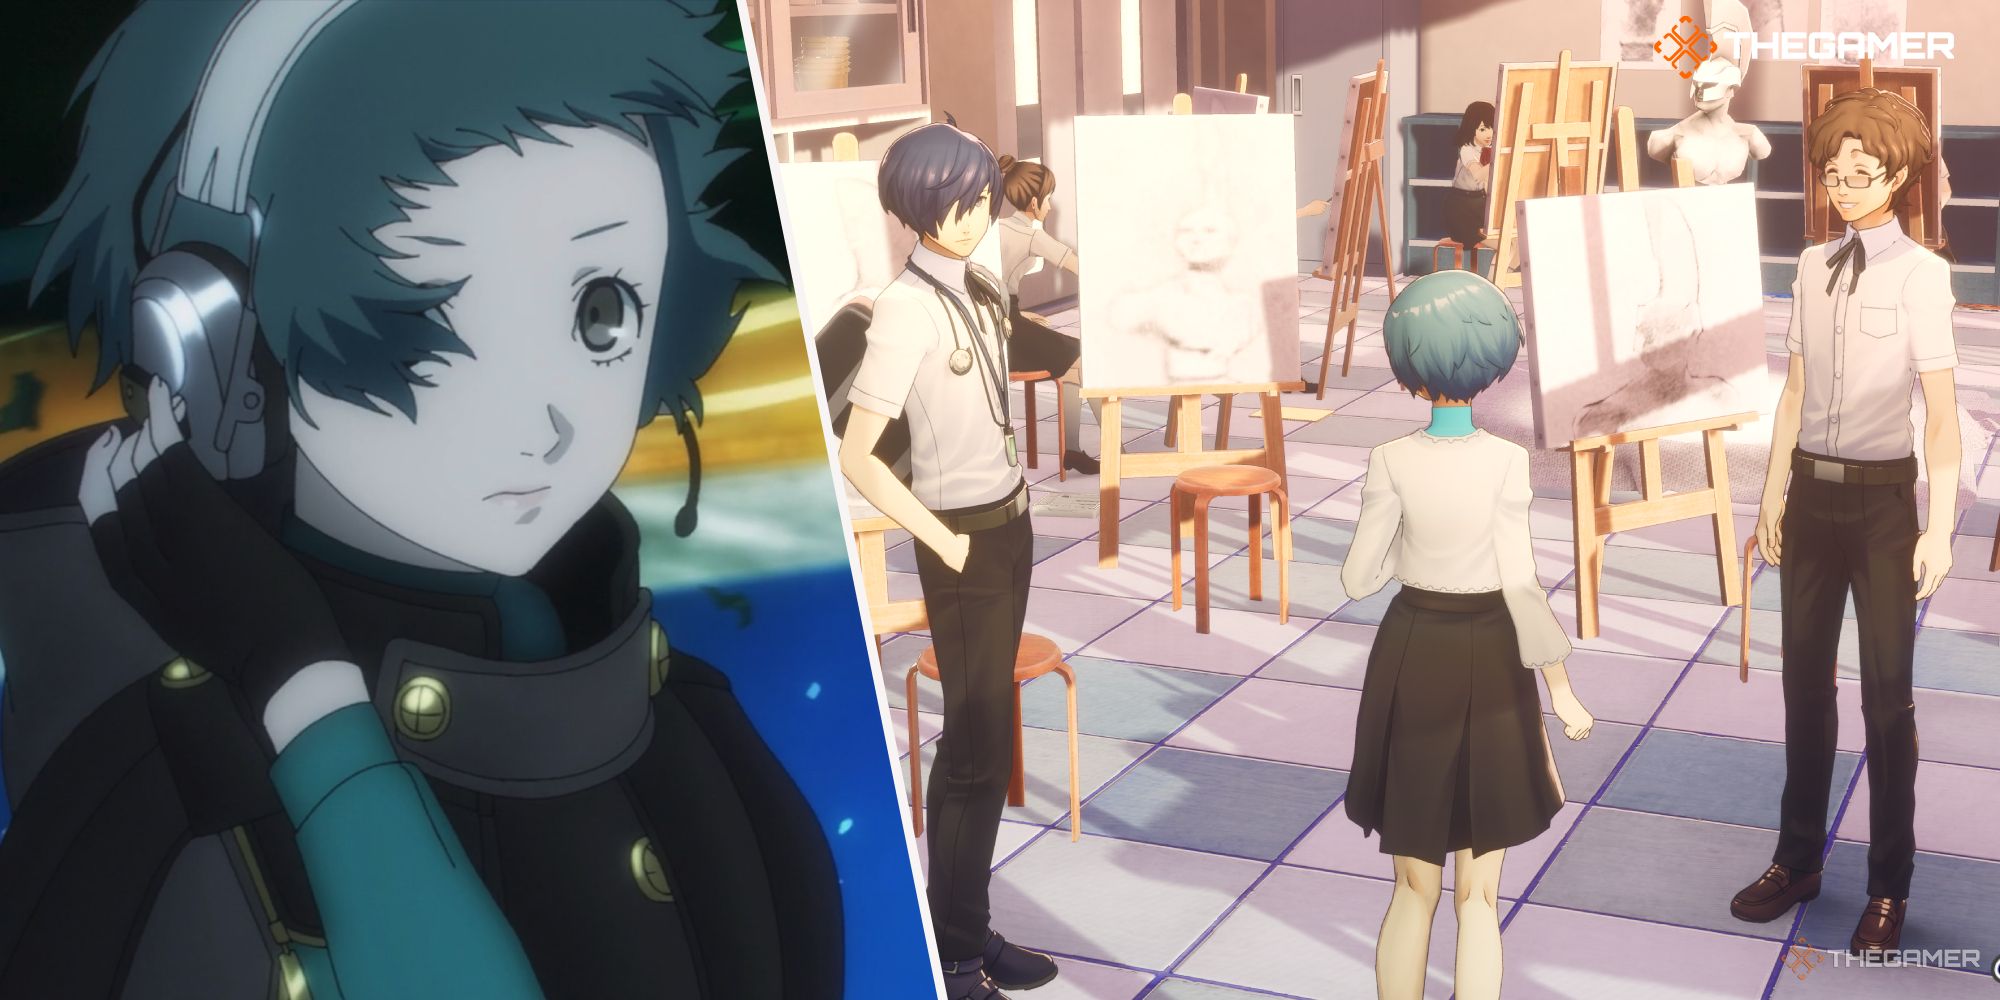 Left: Fuuka, right: Fuuka, Keisuke,  and you standing in the Art Club room in Persona 3 Reload